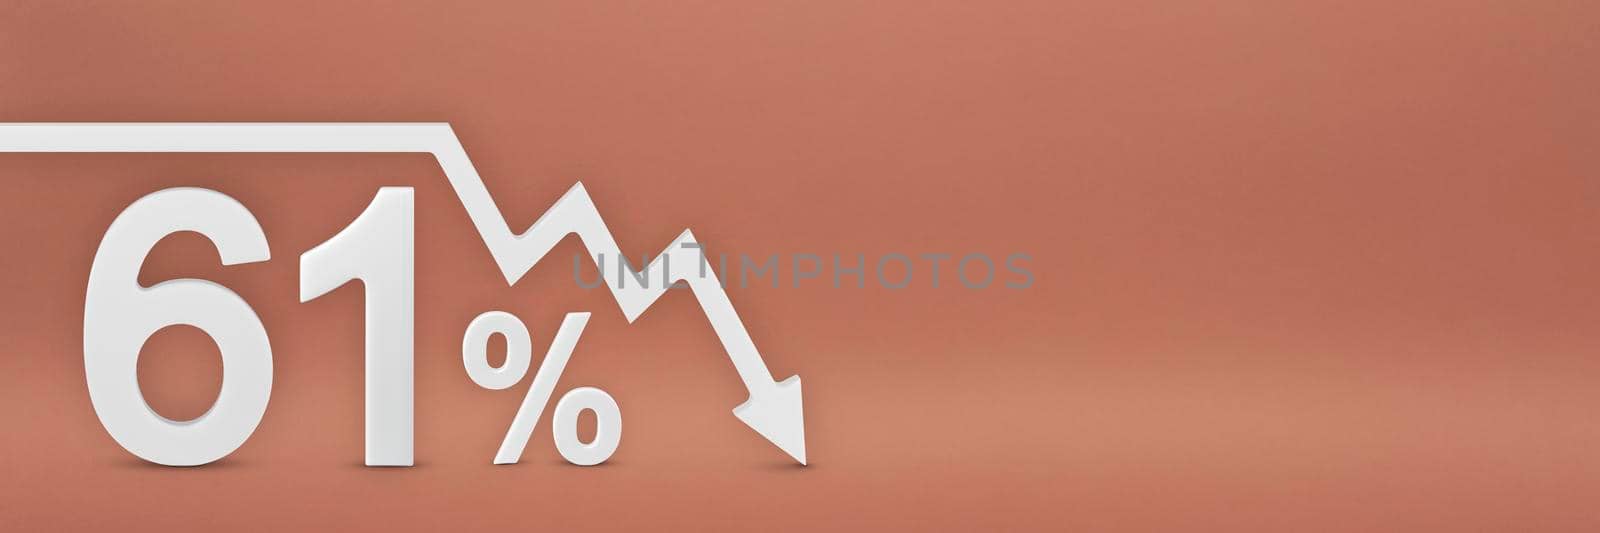 sixty-one percent, the arrow on the graph is pointing down. Stock market crash, bear market, inflation.Economic collapse, collapse of stocks.3d banner,61 percent discount sign on a red background. by SERSOL